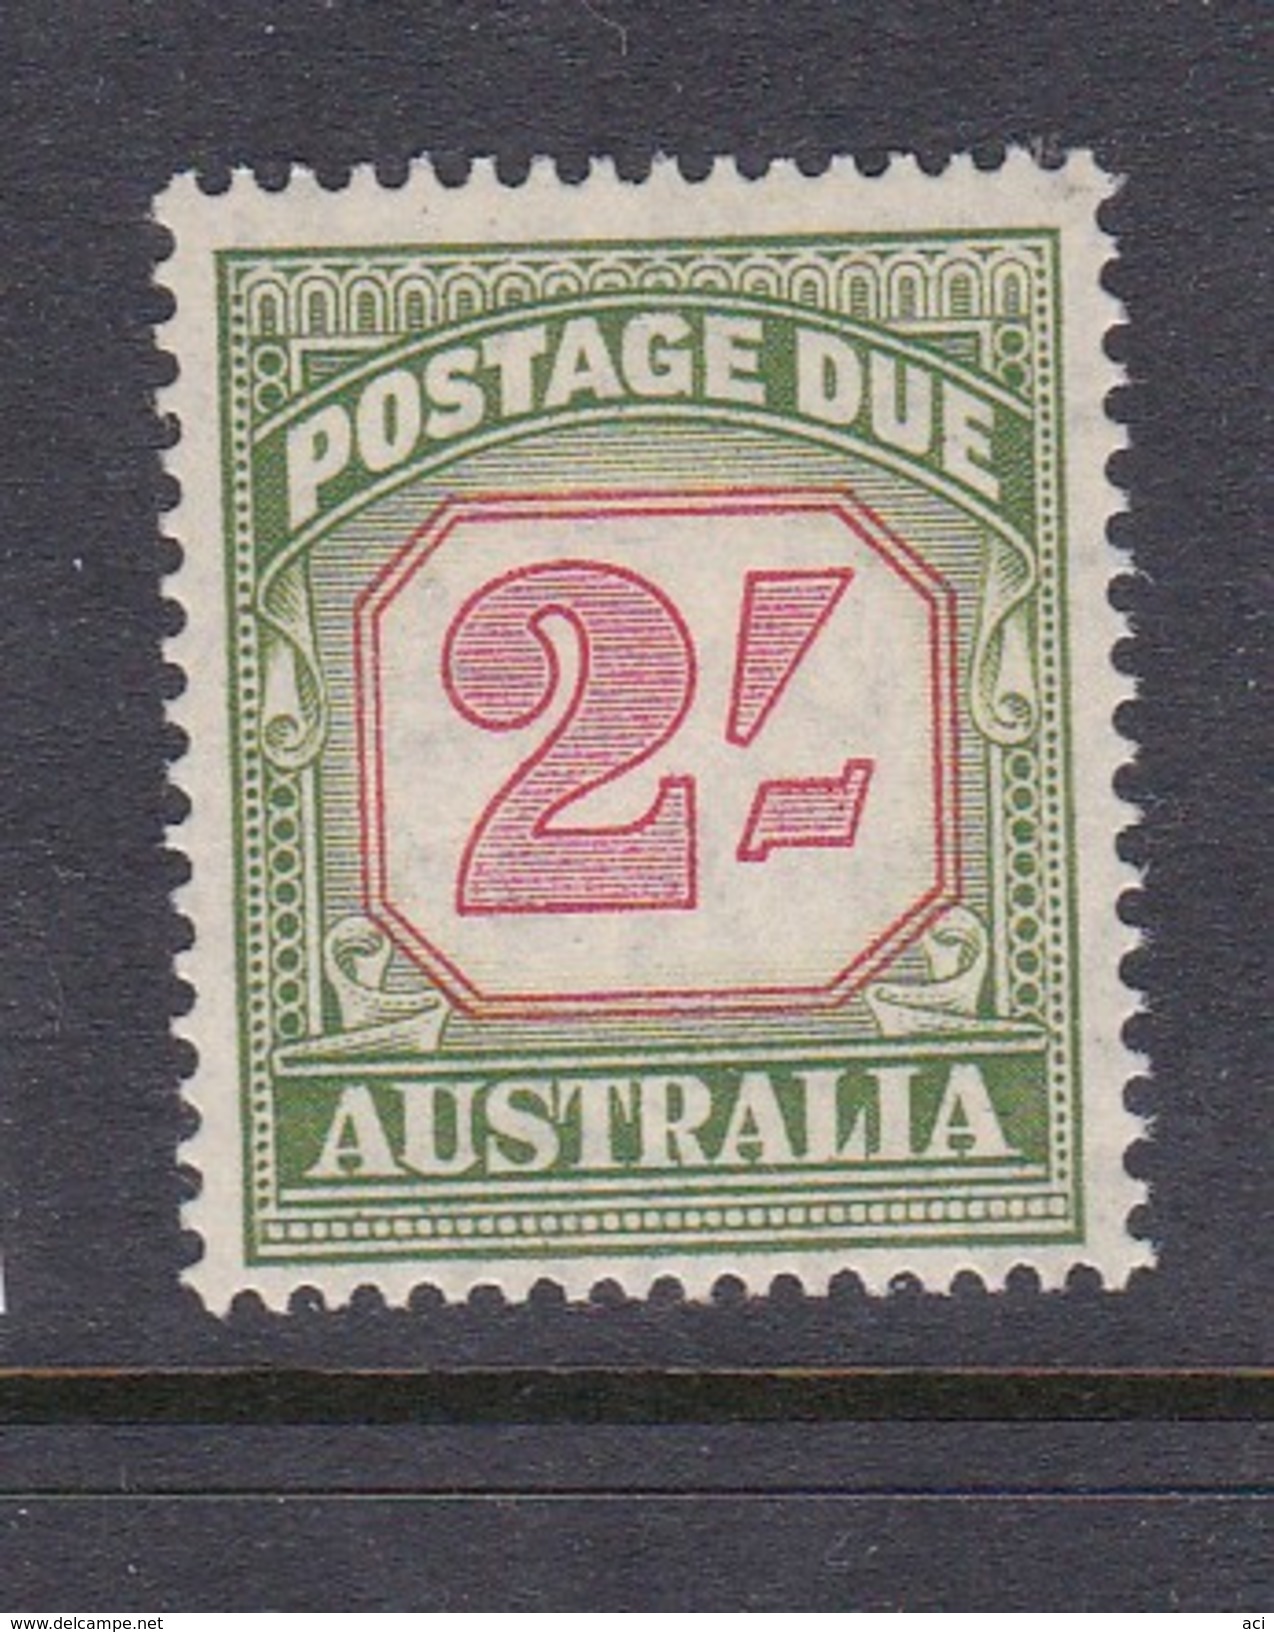 Australia Postage Due Stamps SG D130 1953 Two Shillings Mint Never Hinged - Impuestos